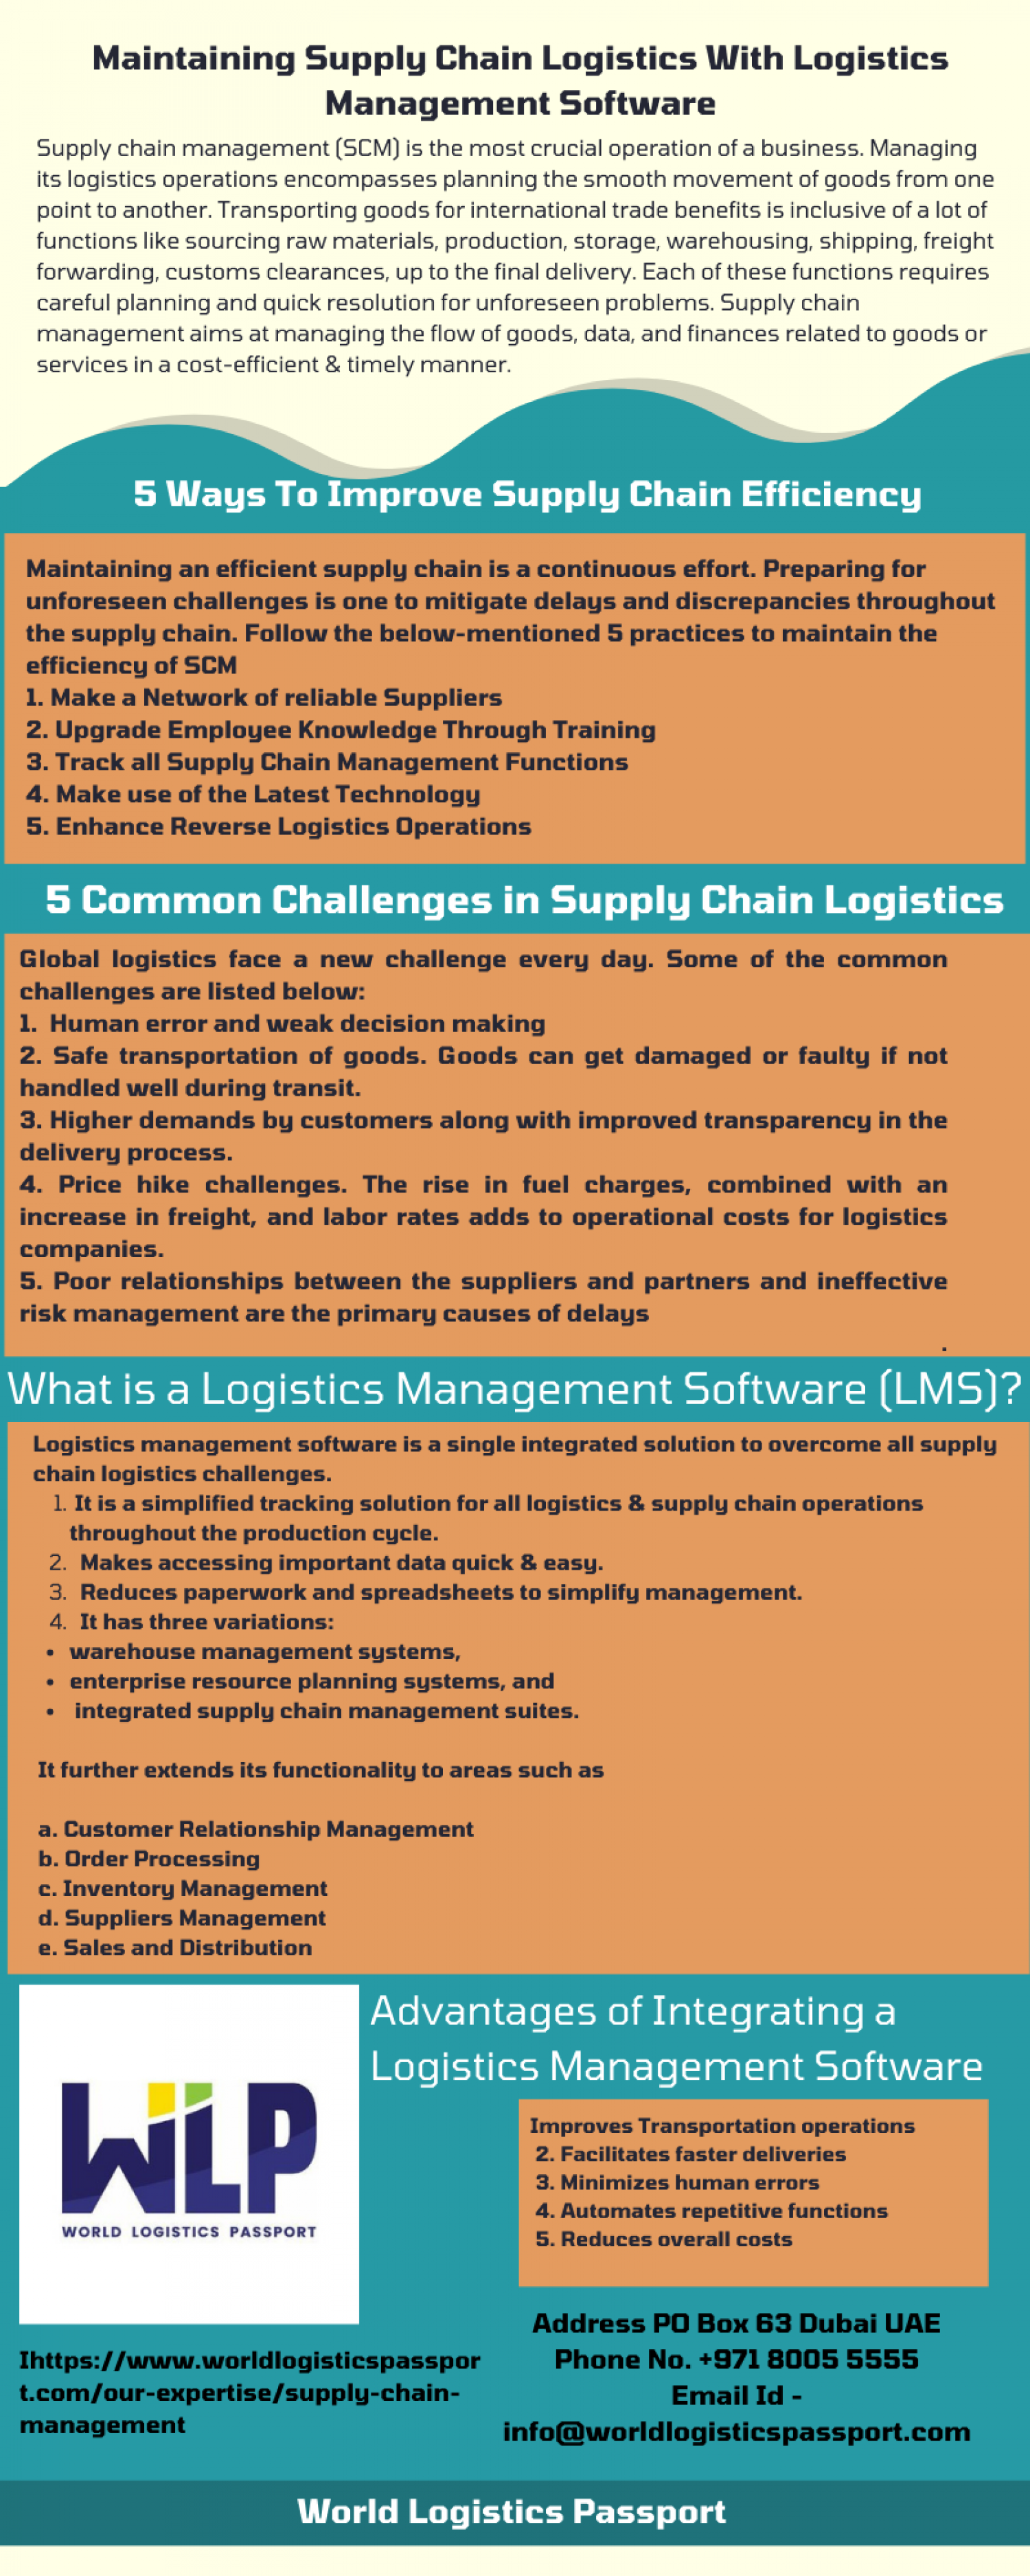 Maintaining Supply Chain Logistics With Logistics Management Software Infographic